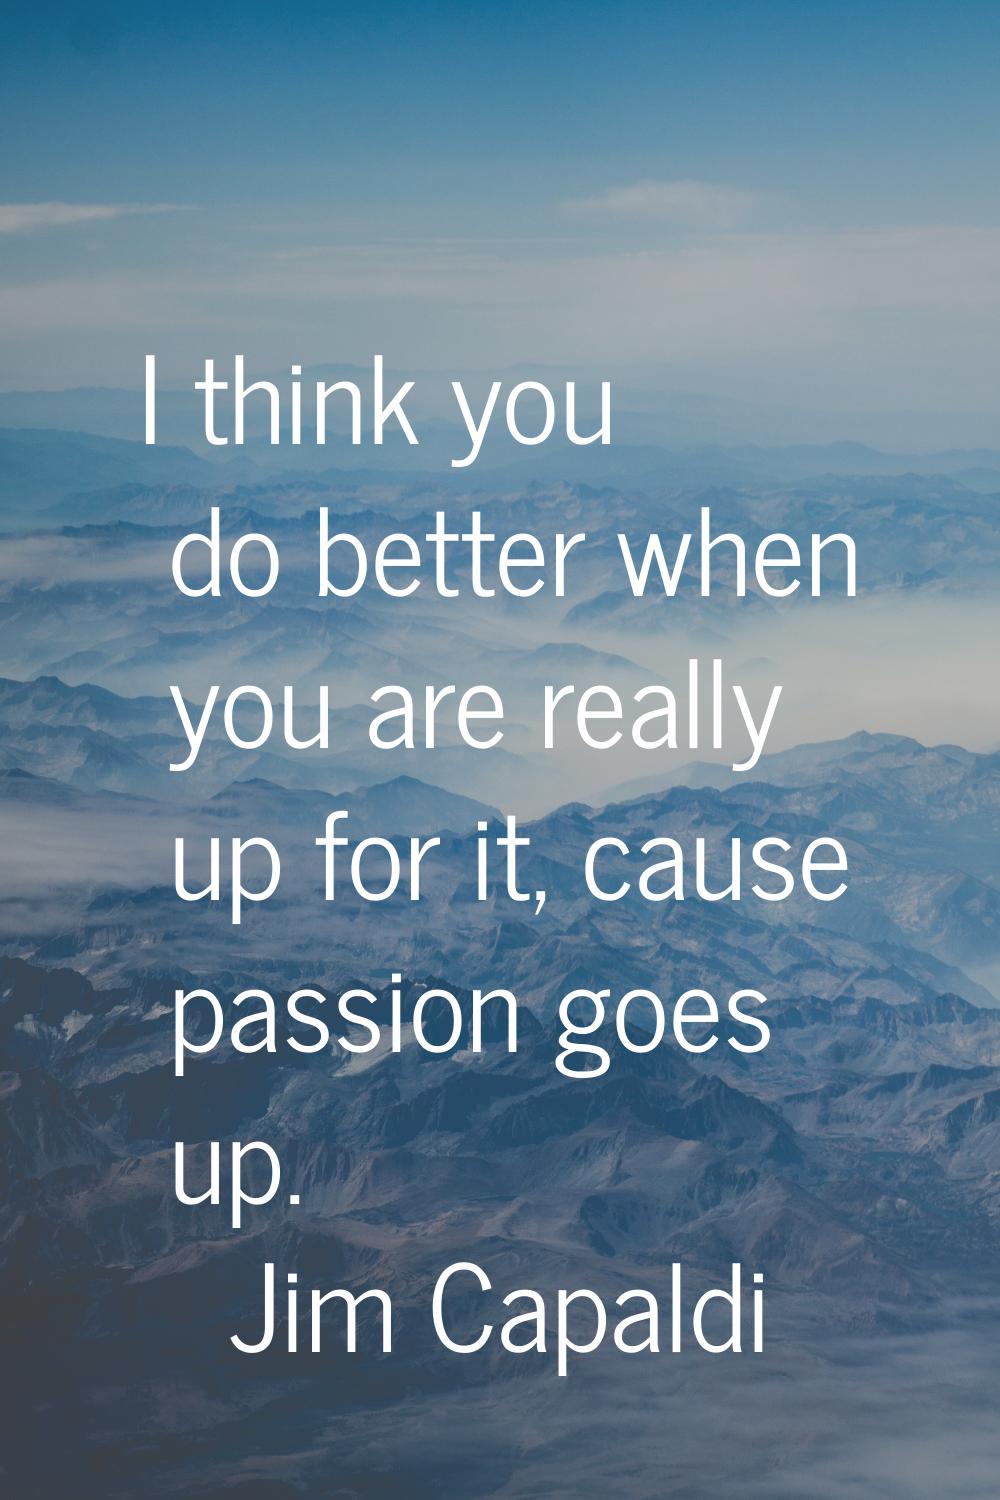 I think you do better when you are really up for it, cause passion goes up.